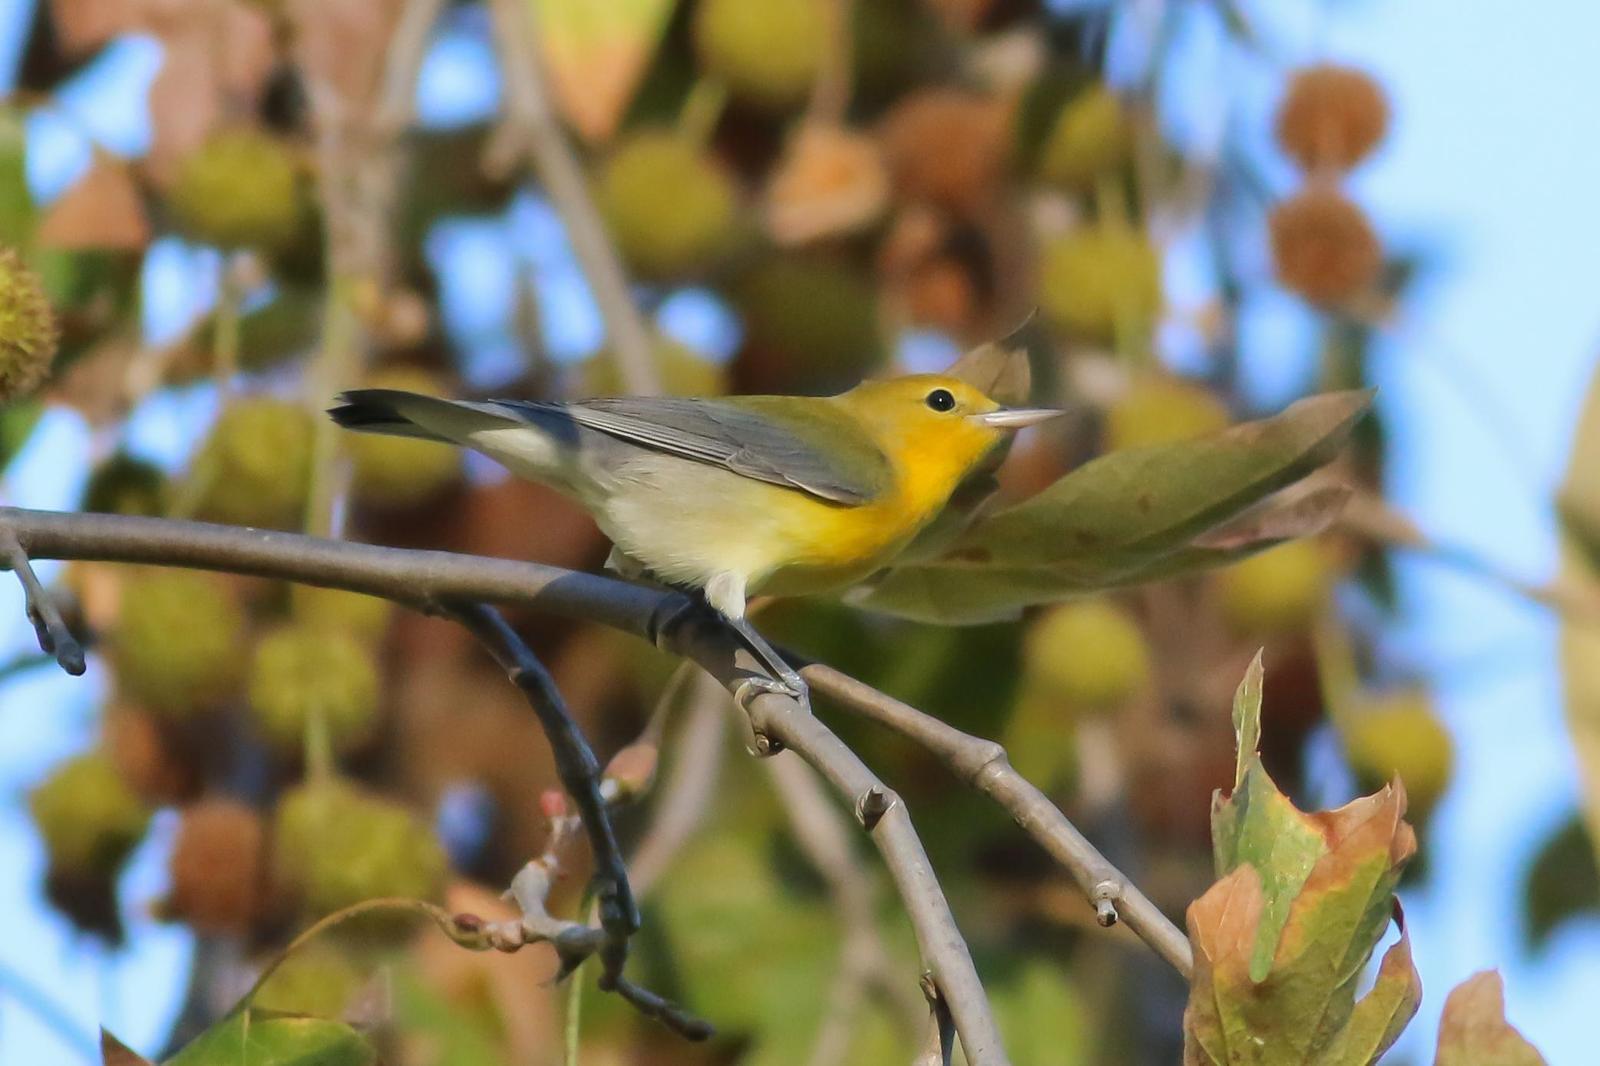 Prothonotary Warbler Photo by Tom Ford-Hutchinson